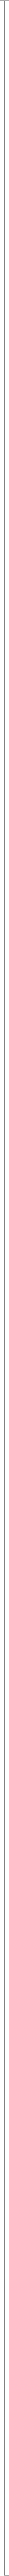 Treeview-grey-line.png